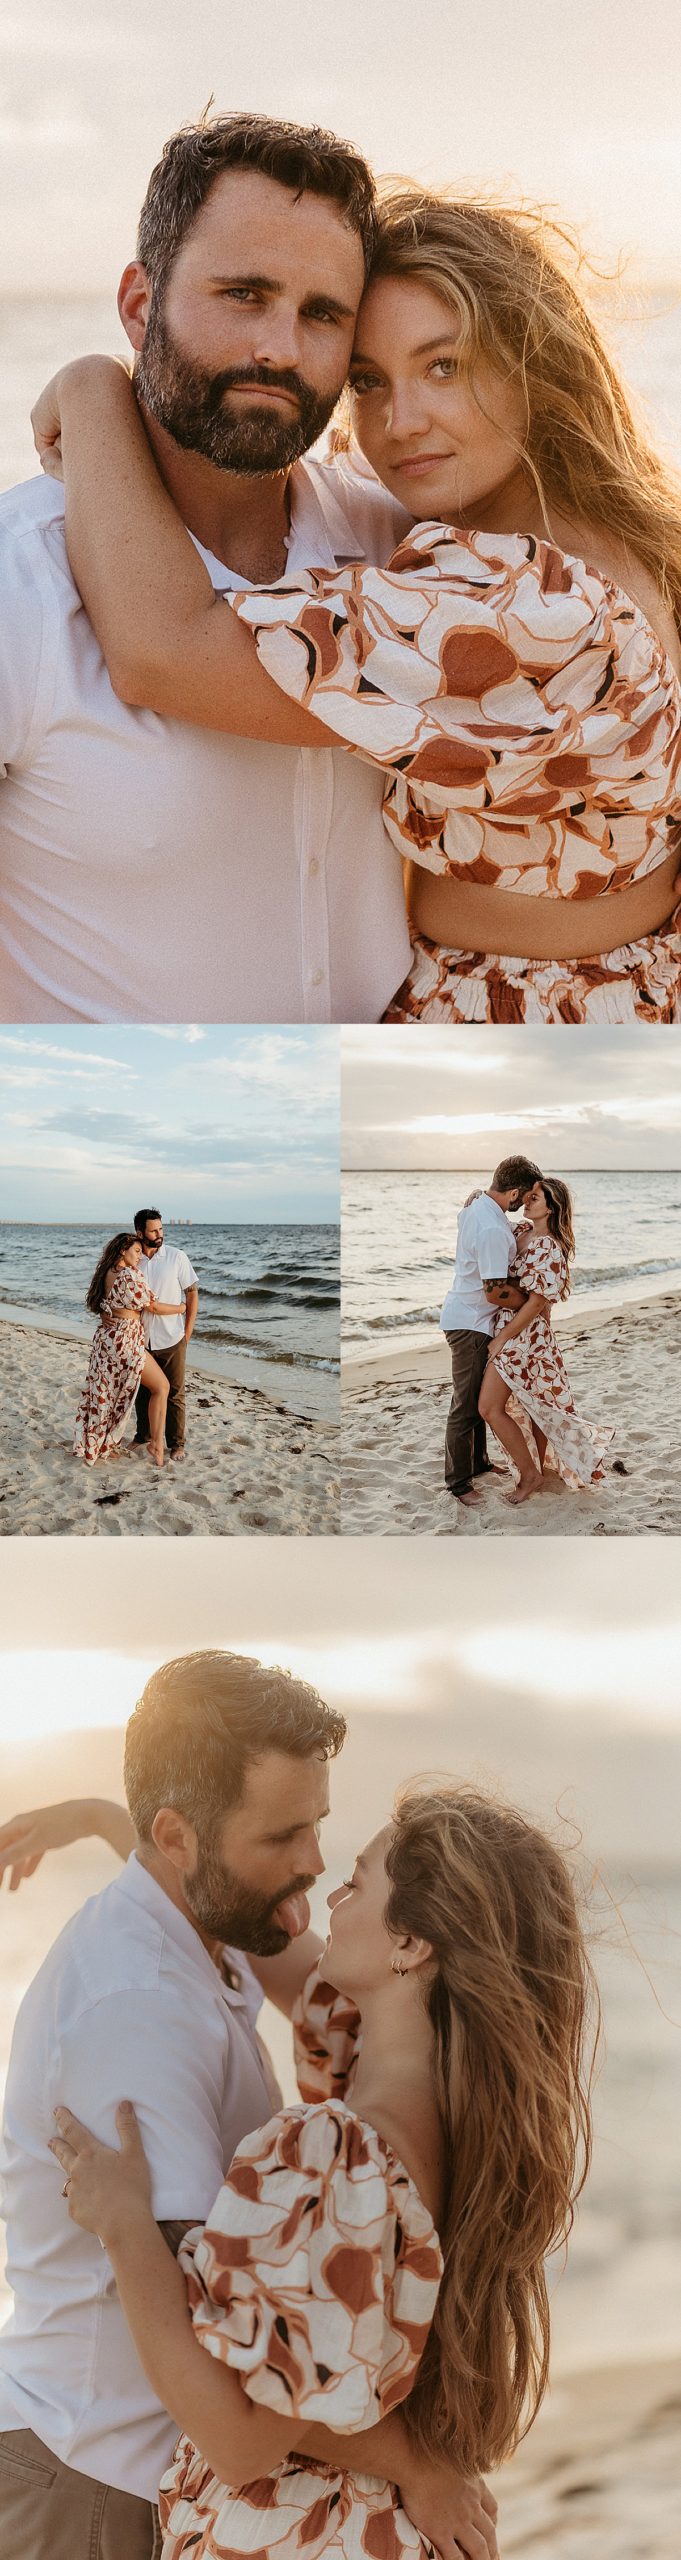 engaged couple walking on the beach at sunset and playing in the water 